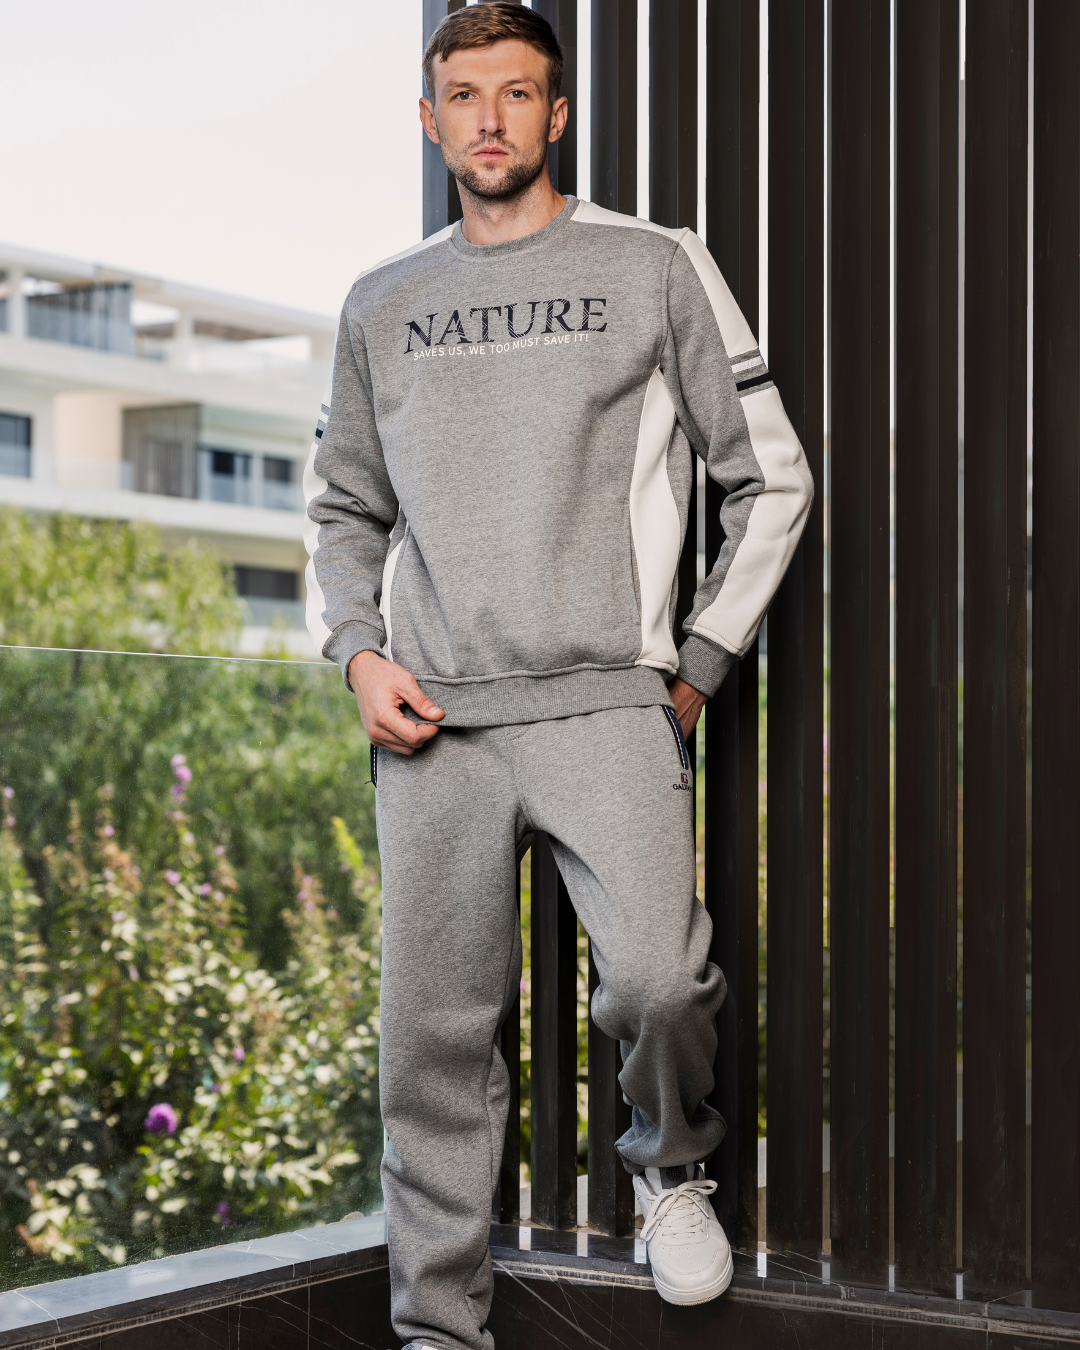 NATURE Men's pajamas with print on the chest